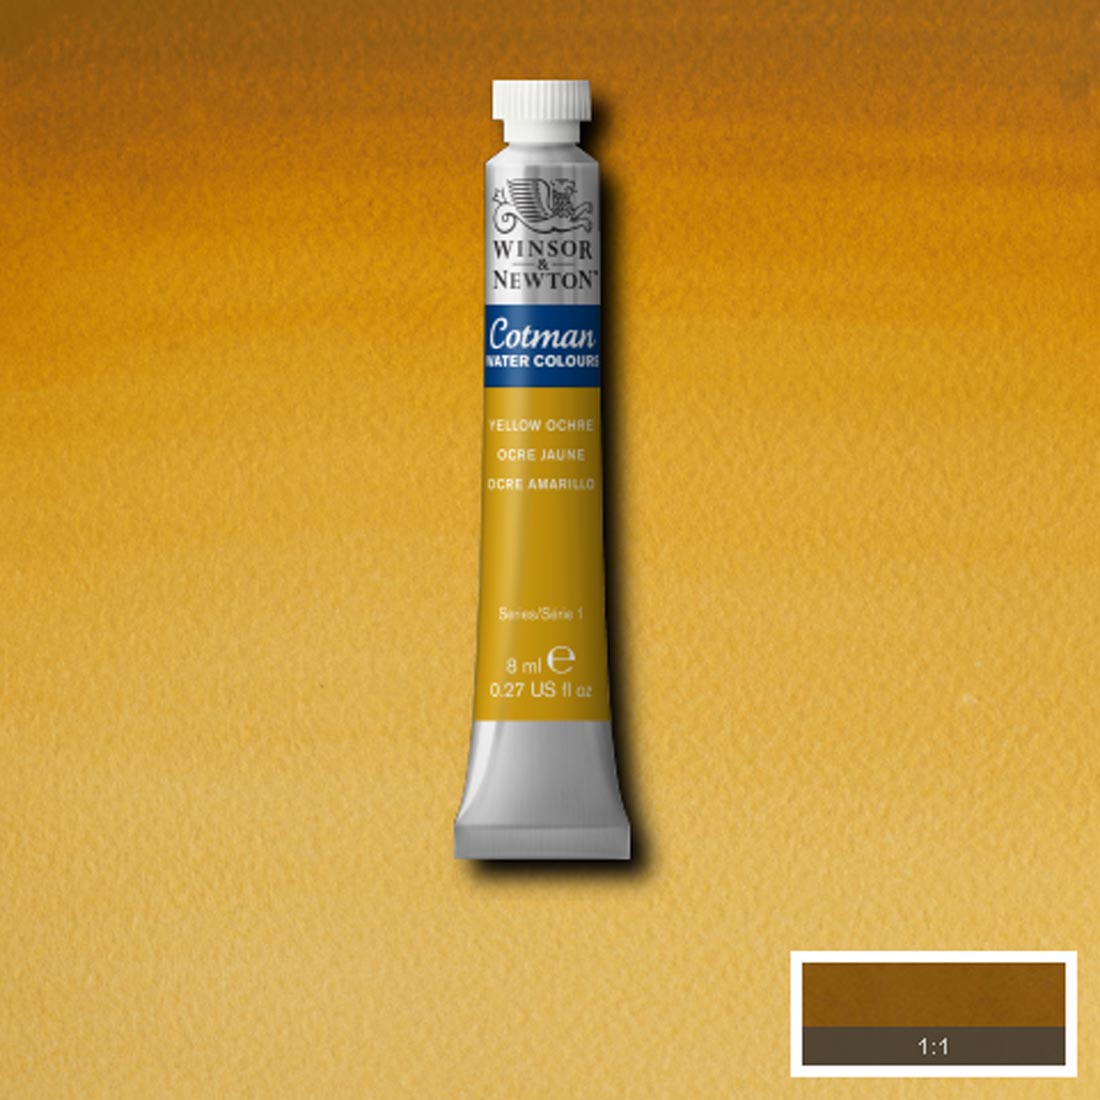 Tube of Yellow Ochre Hue Winsor and Newton Cotman Water Colour with a paint swatch for the background